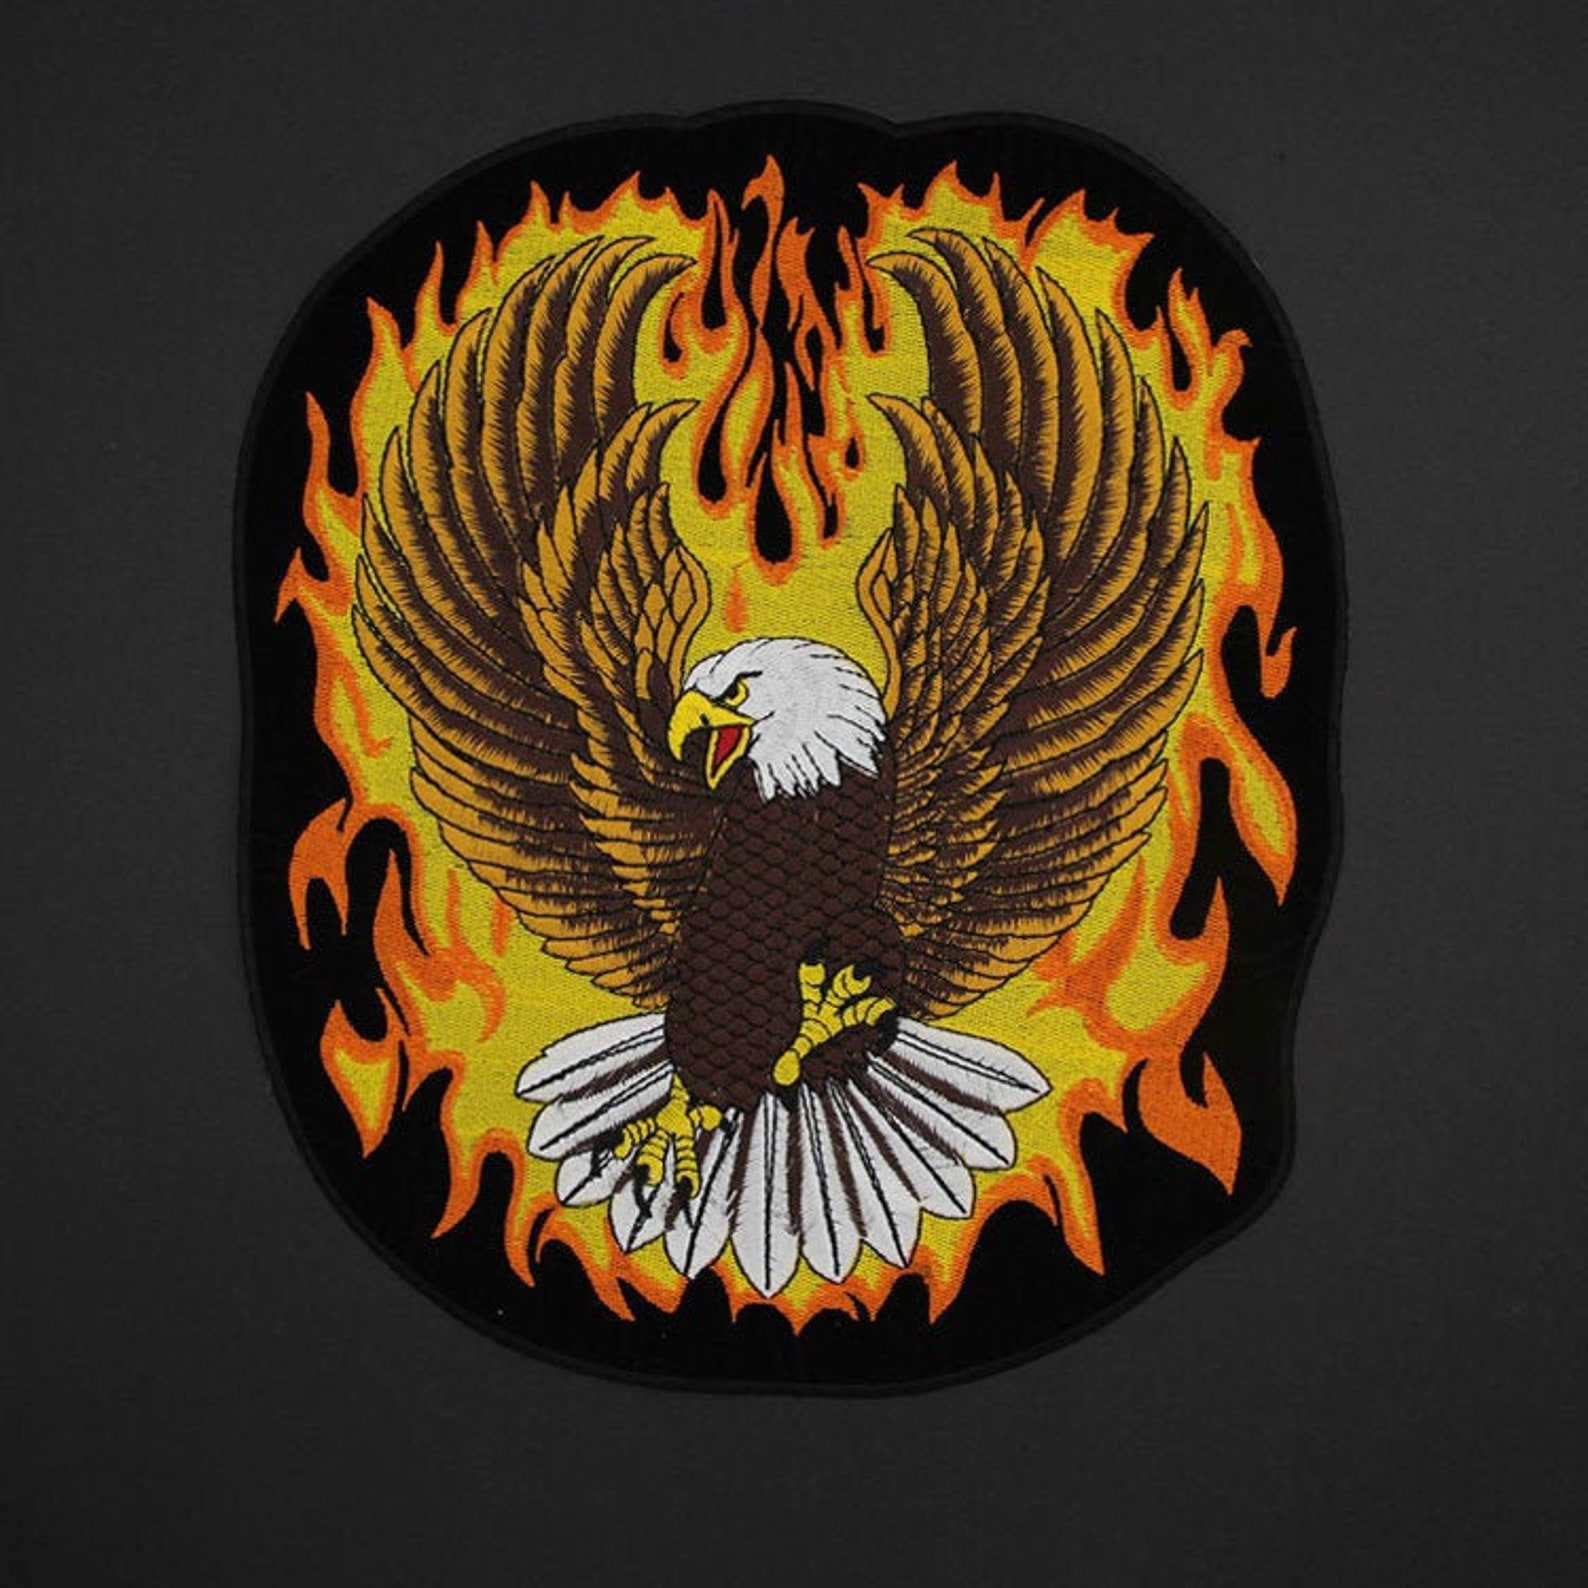 custom-iron-on-back-patches-for-jackets-custom-embroidered-etsy